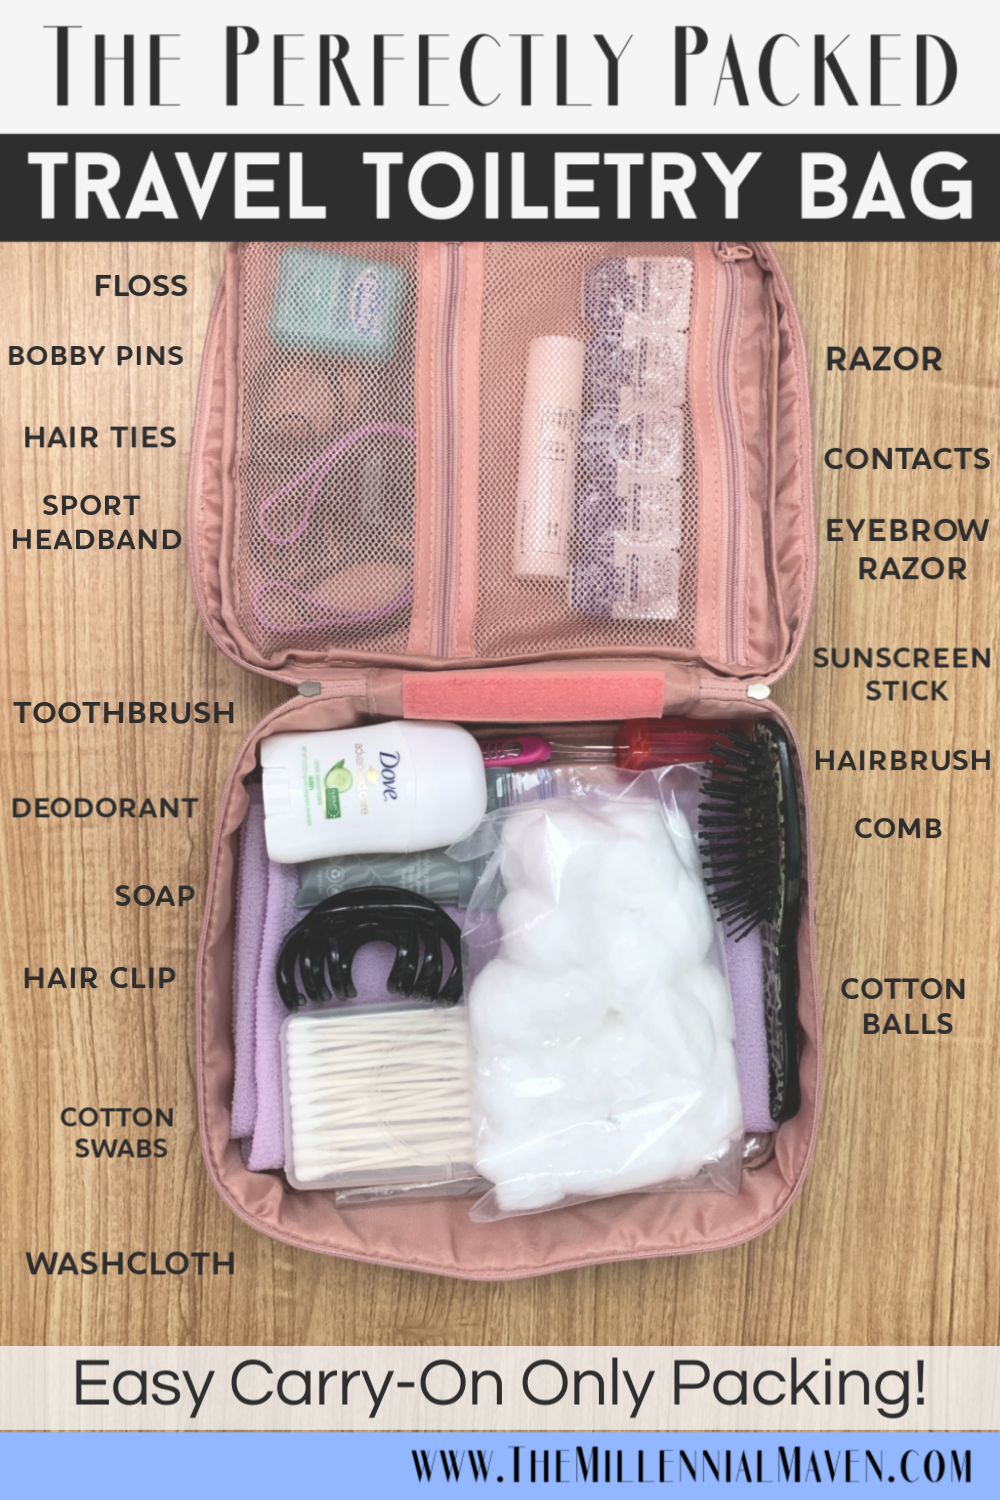 Packing Your Toiletries - What You Need to Know